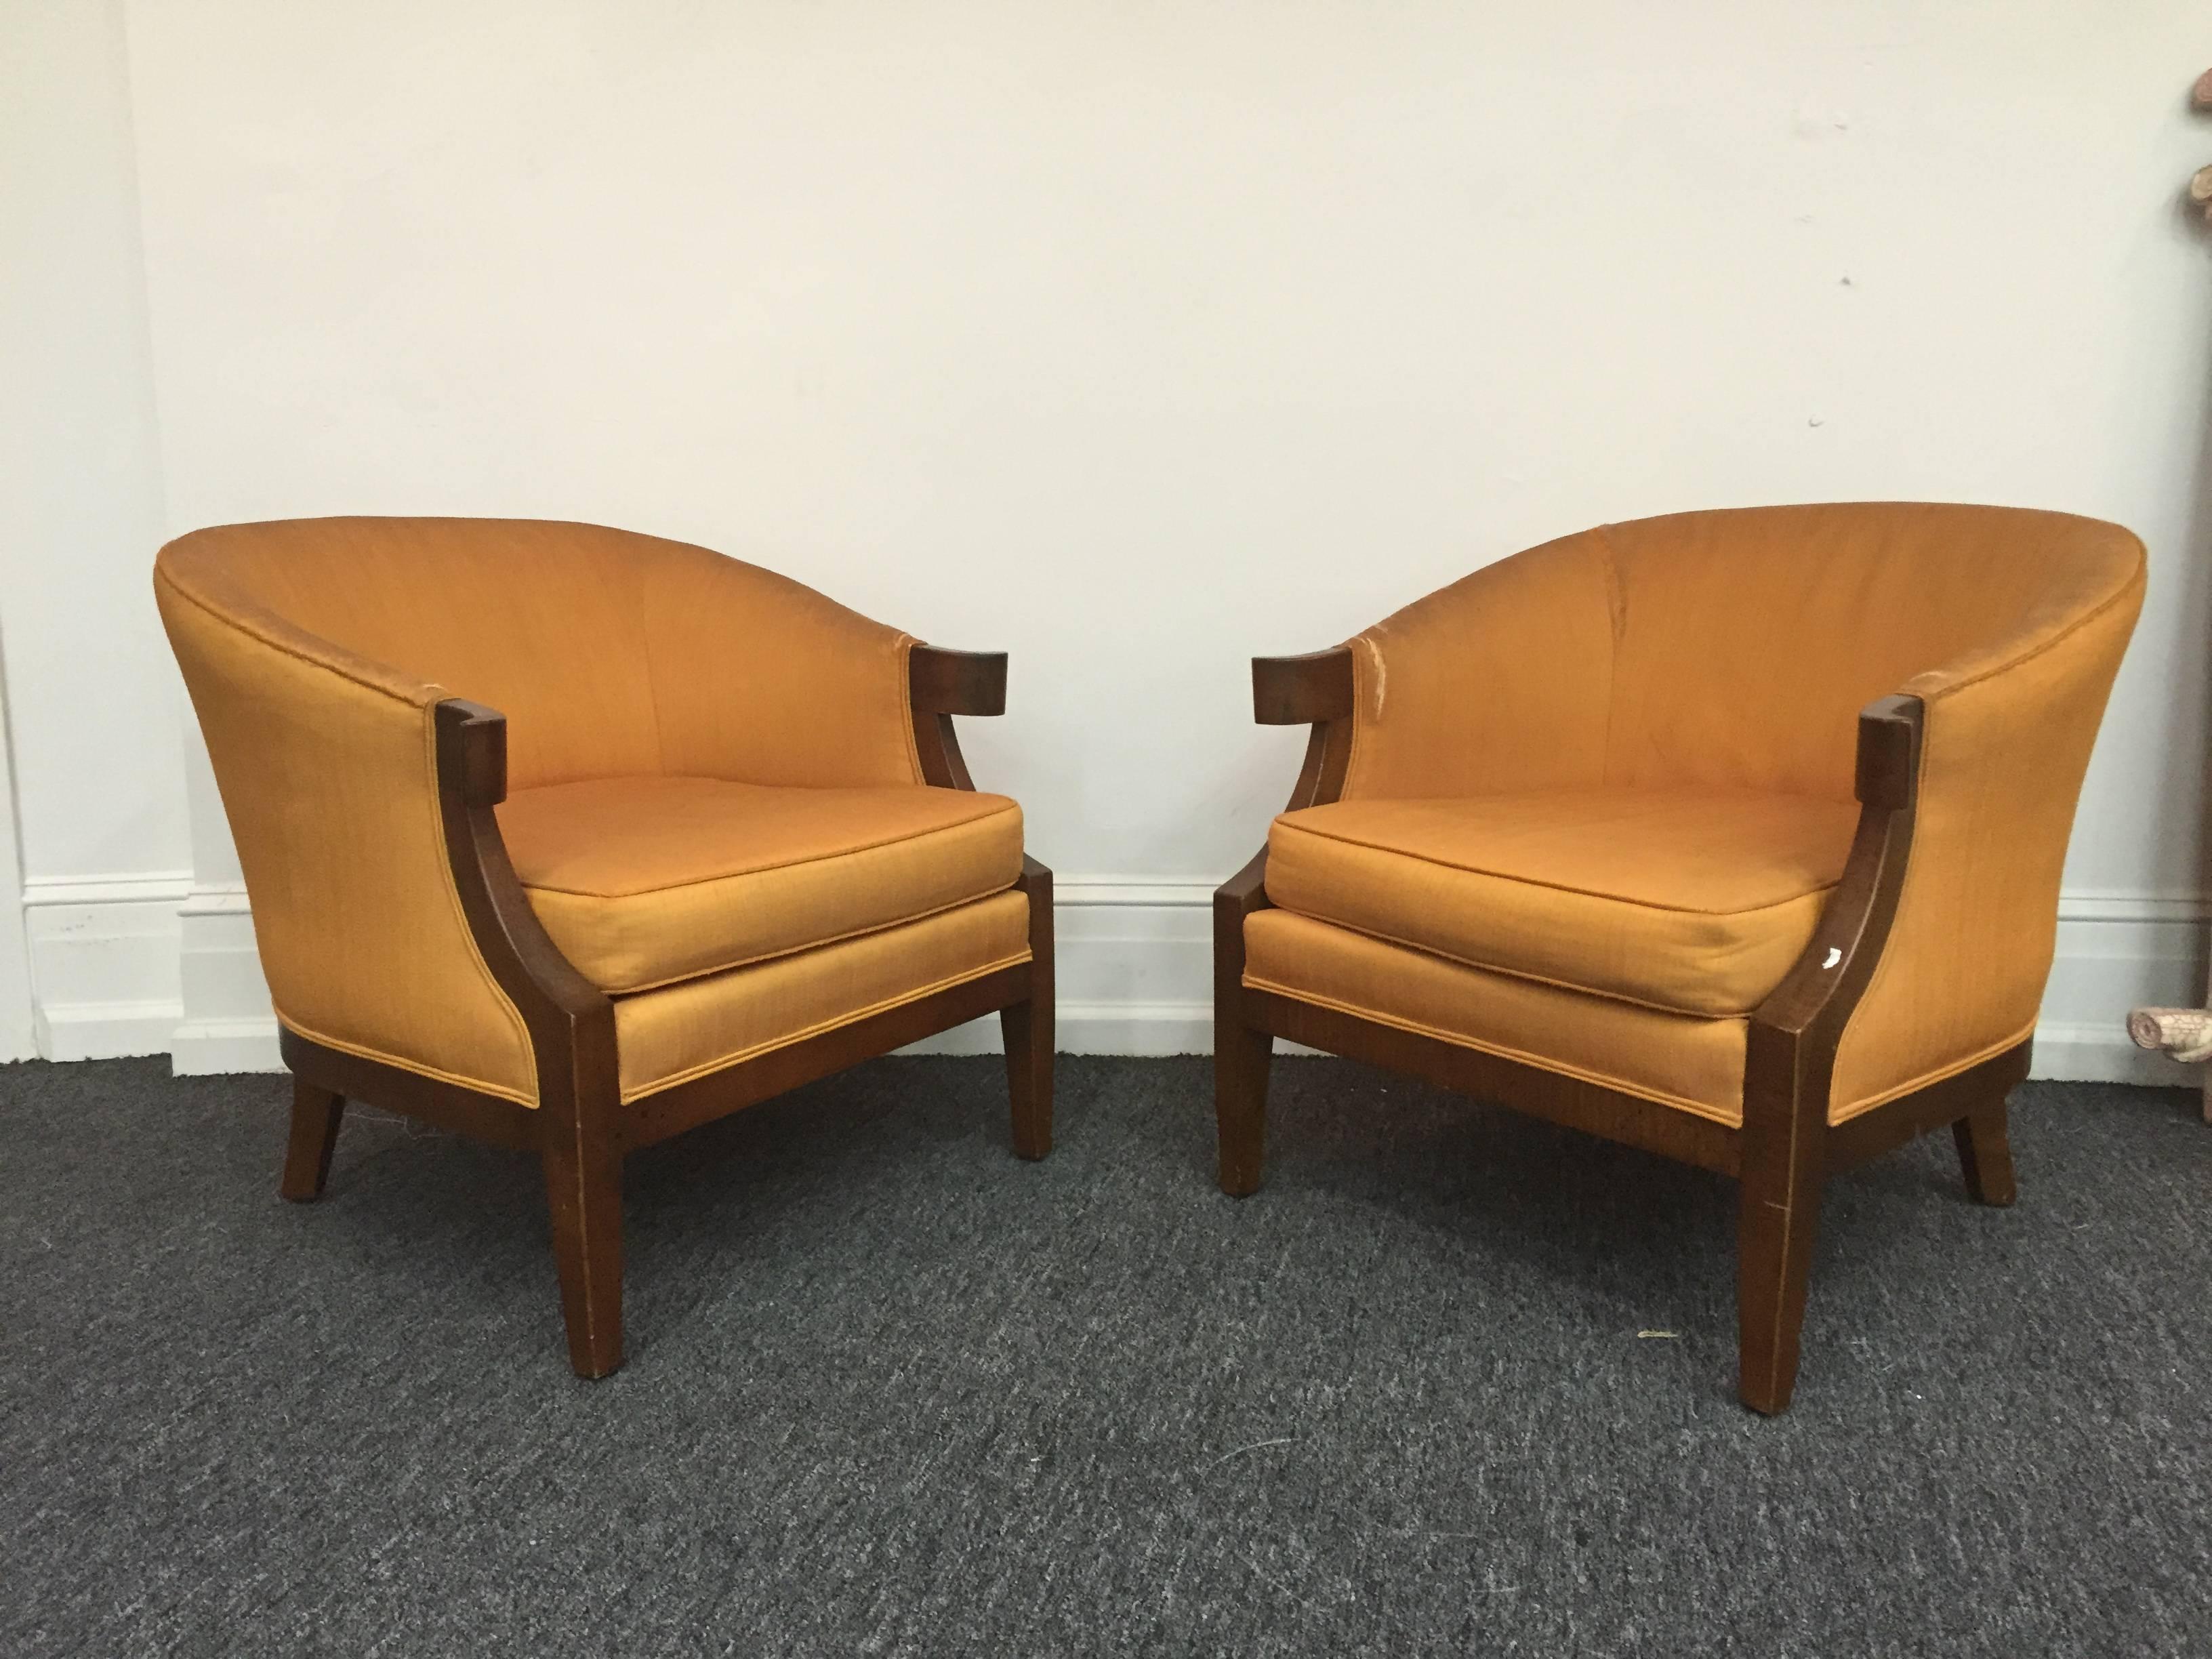 A pair of elegant Art Deco slipper chairs in the manner of Tommi Parzinger with sculpted flared arms.